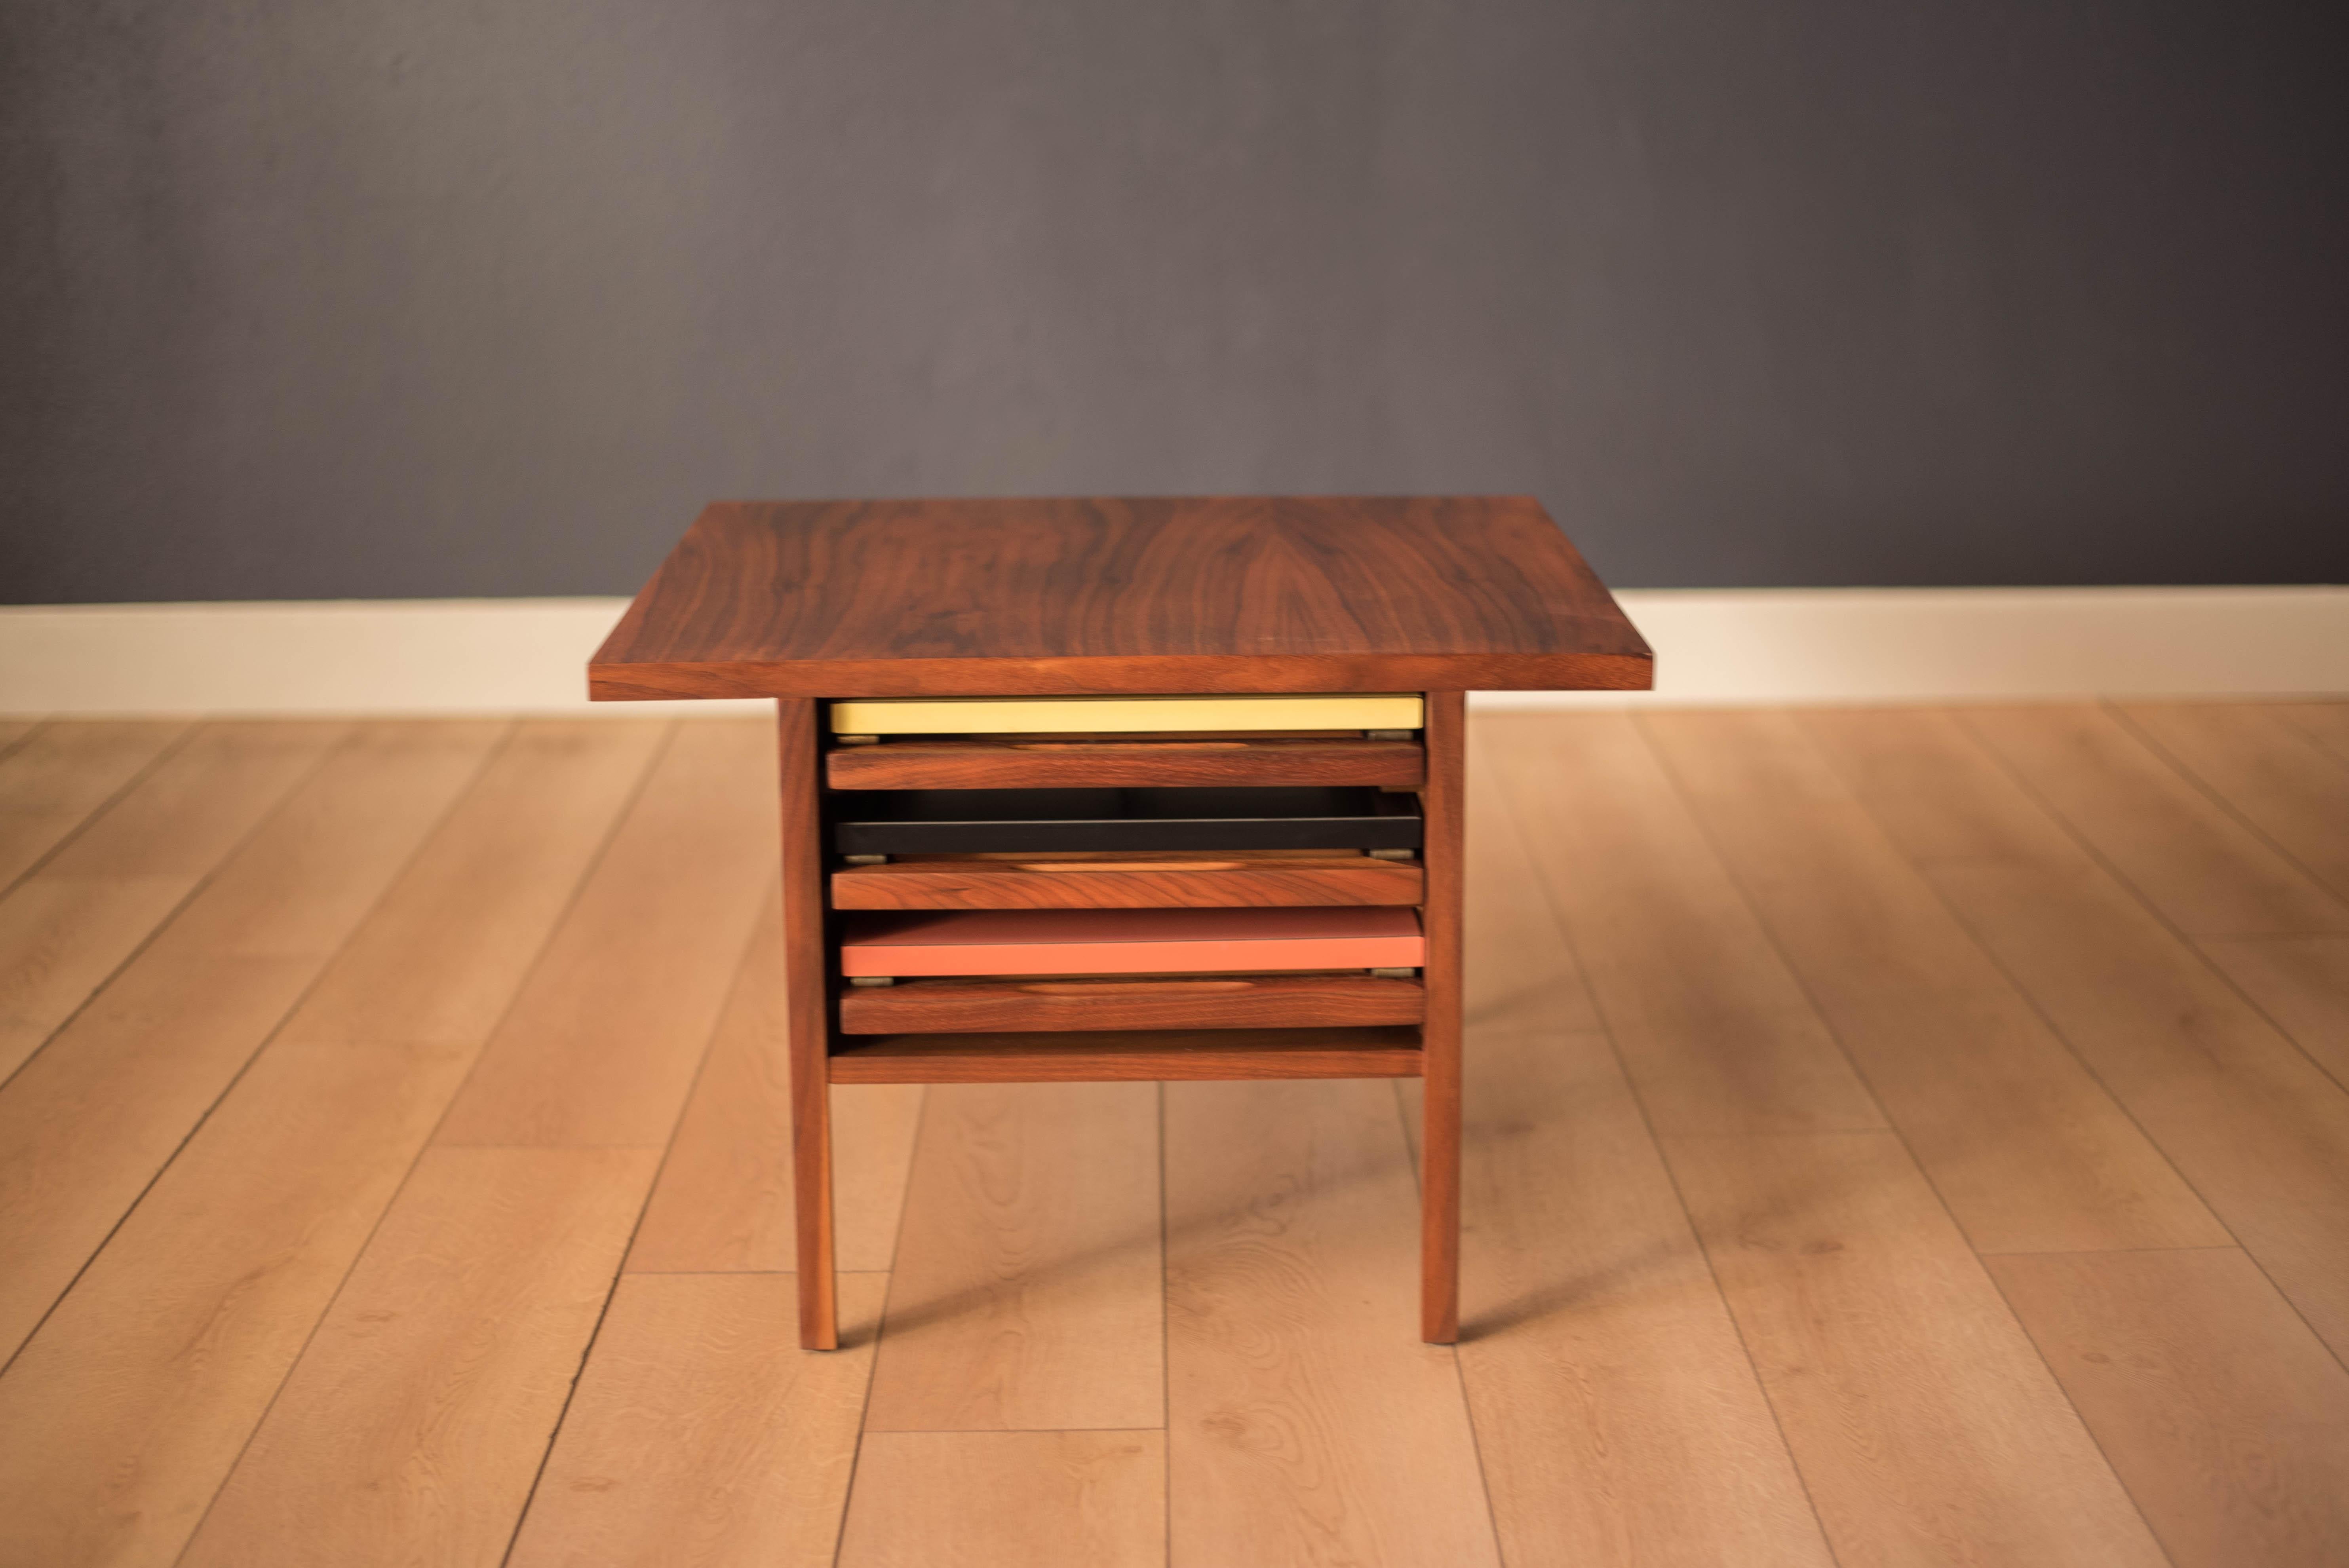 Mid Century walnut coffee table and nesting side tables designed by John Keal for Brown Saltman. This unique piece includes three foldable tray tables that store inside cabinet. Tables have collapsible solid walnut legs, brass supports and